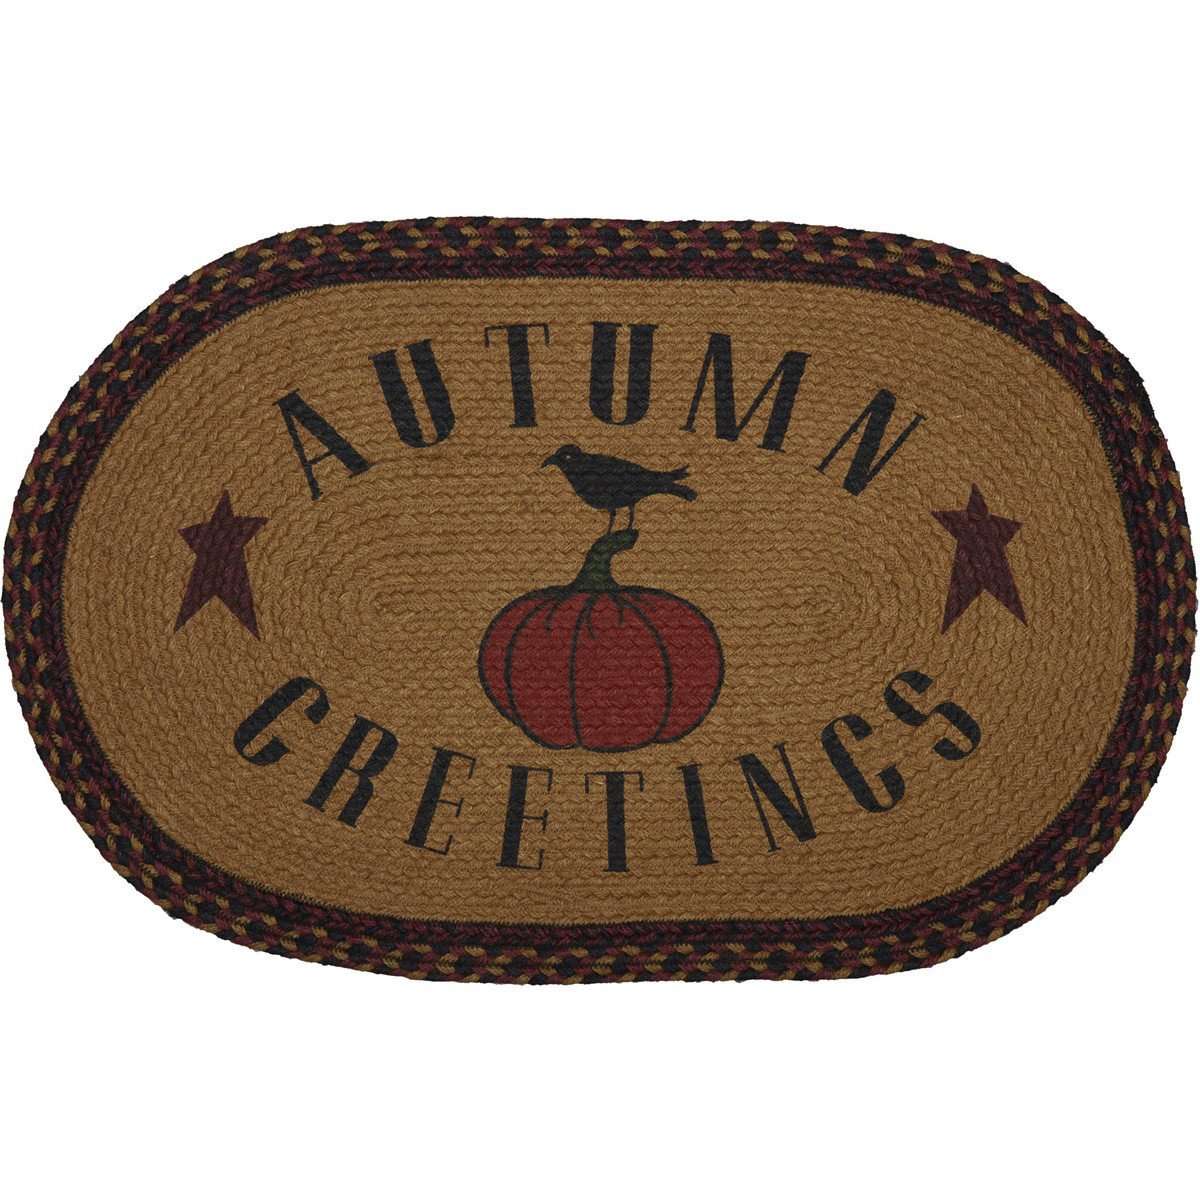 Heritage Farms Harvest Autumn Greetings Jute Braided Rug Oval rugs VHC Brands 